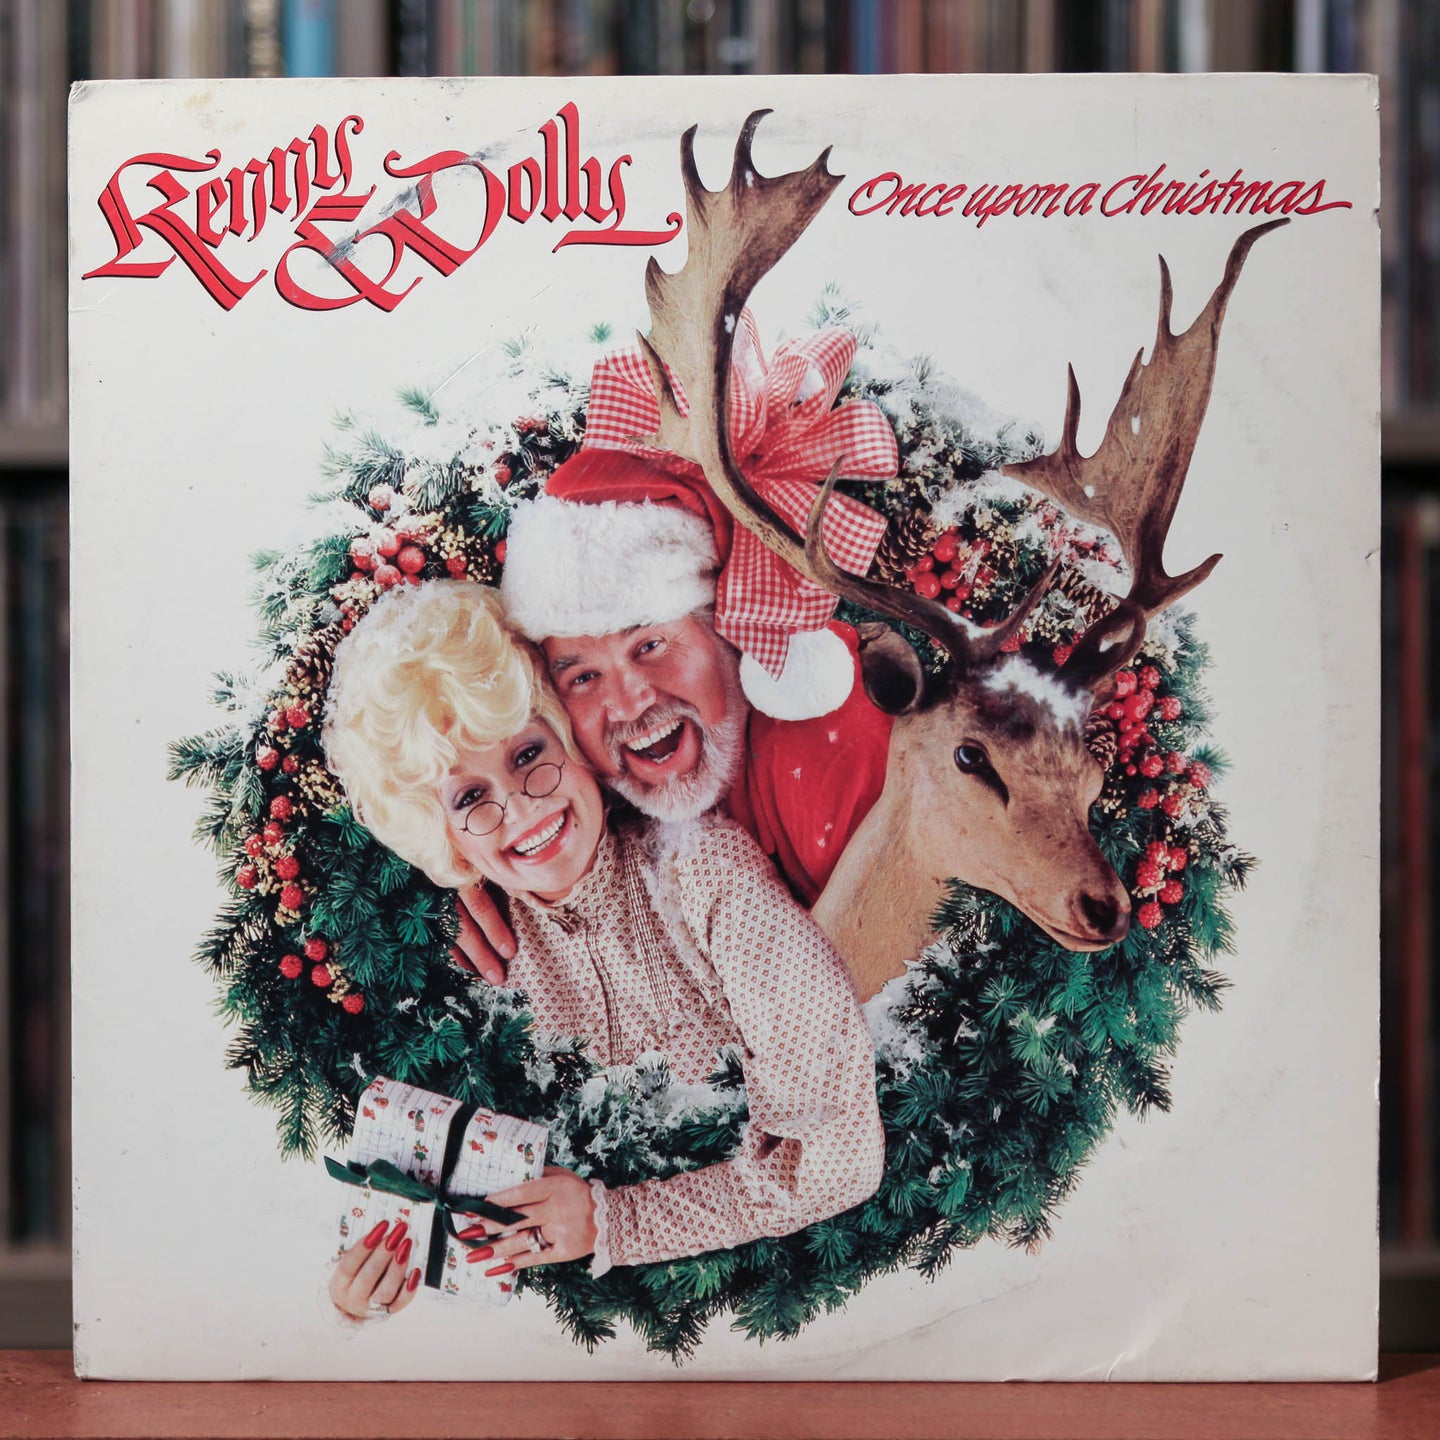 Kenny & Dolly - Once Upon A Christmas - 1984 RCA, VG/VG